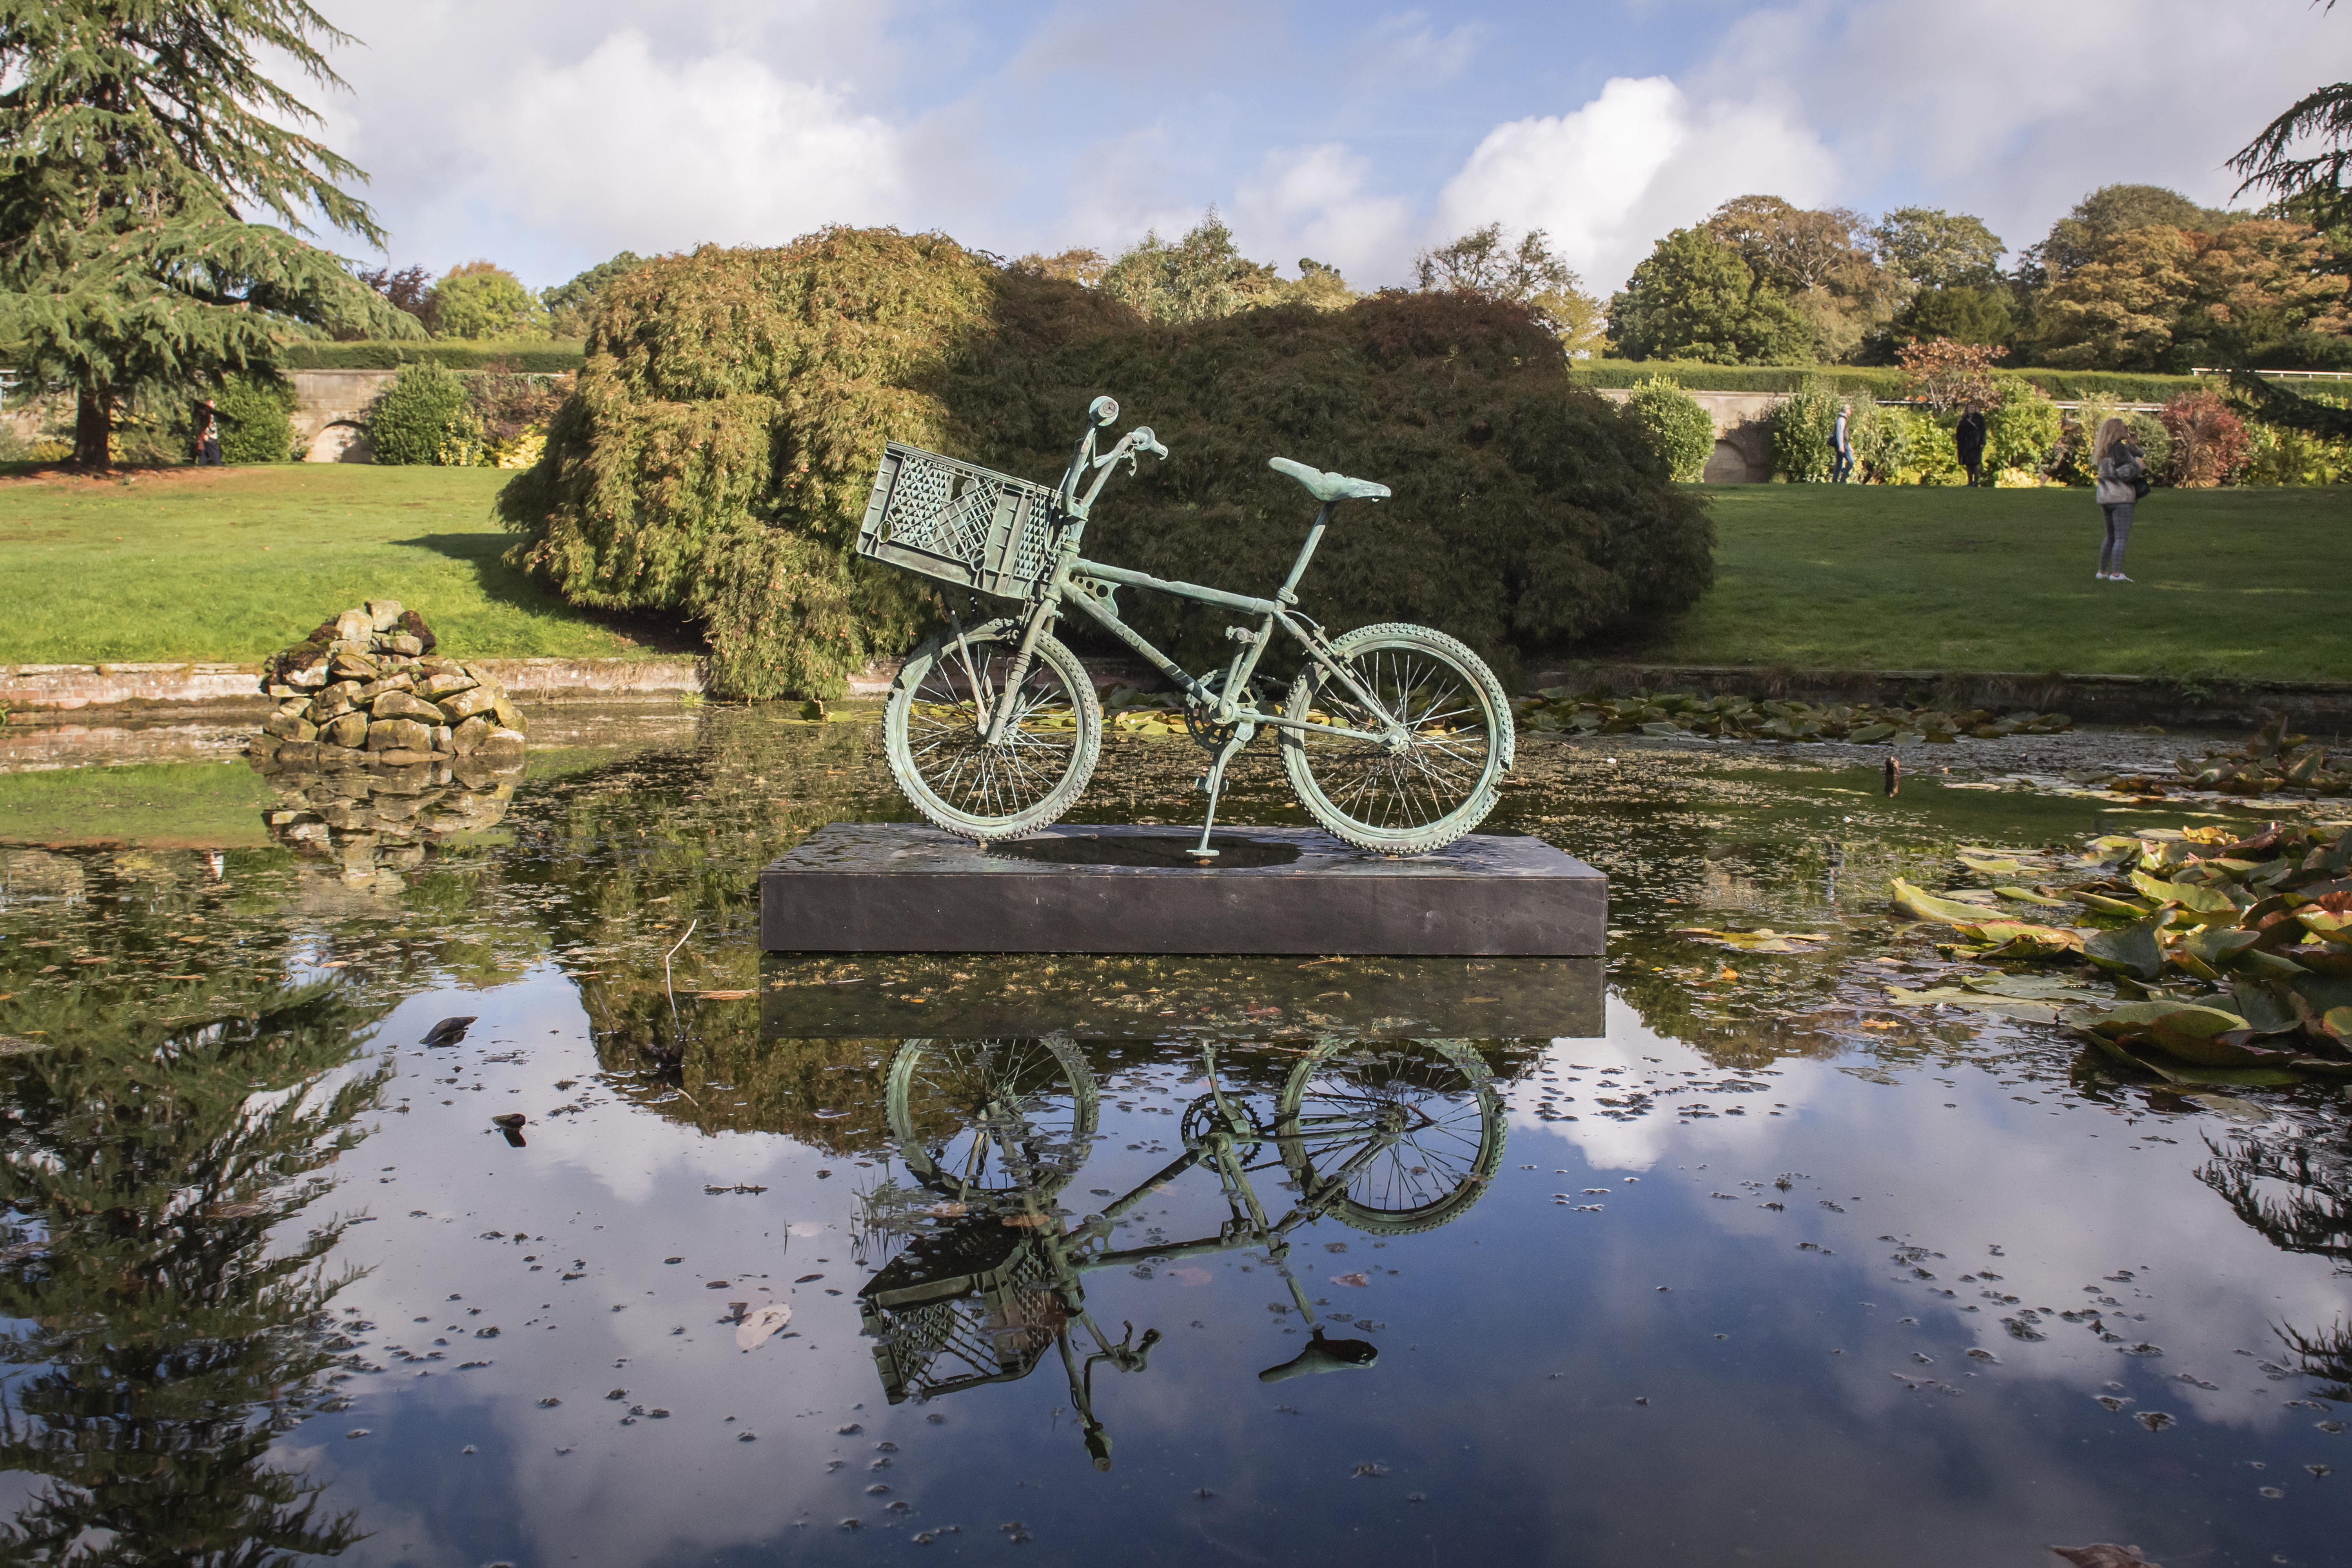 A bronze bicycle mounted on a plinth in the centre of a pond, with bushes and trees in the background.